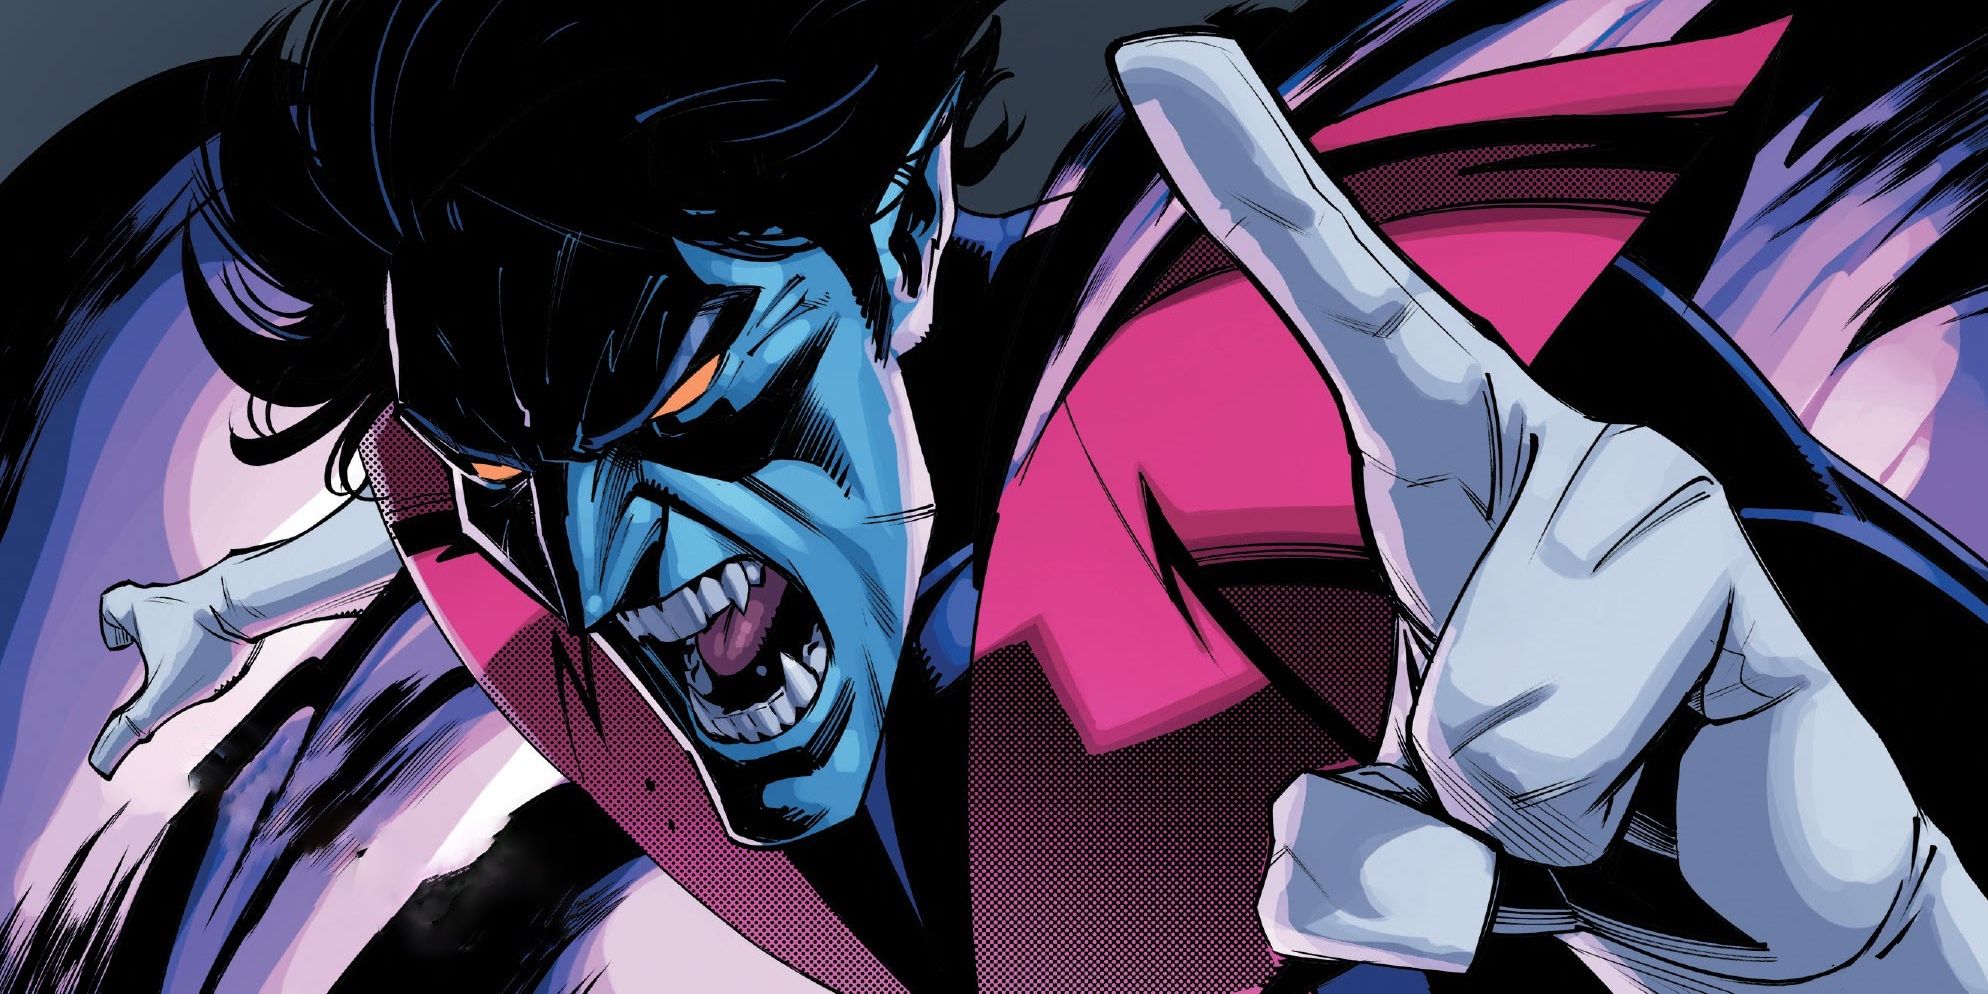 X-Men's Nightcrawler Just Teleported An Entire Moon